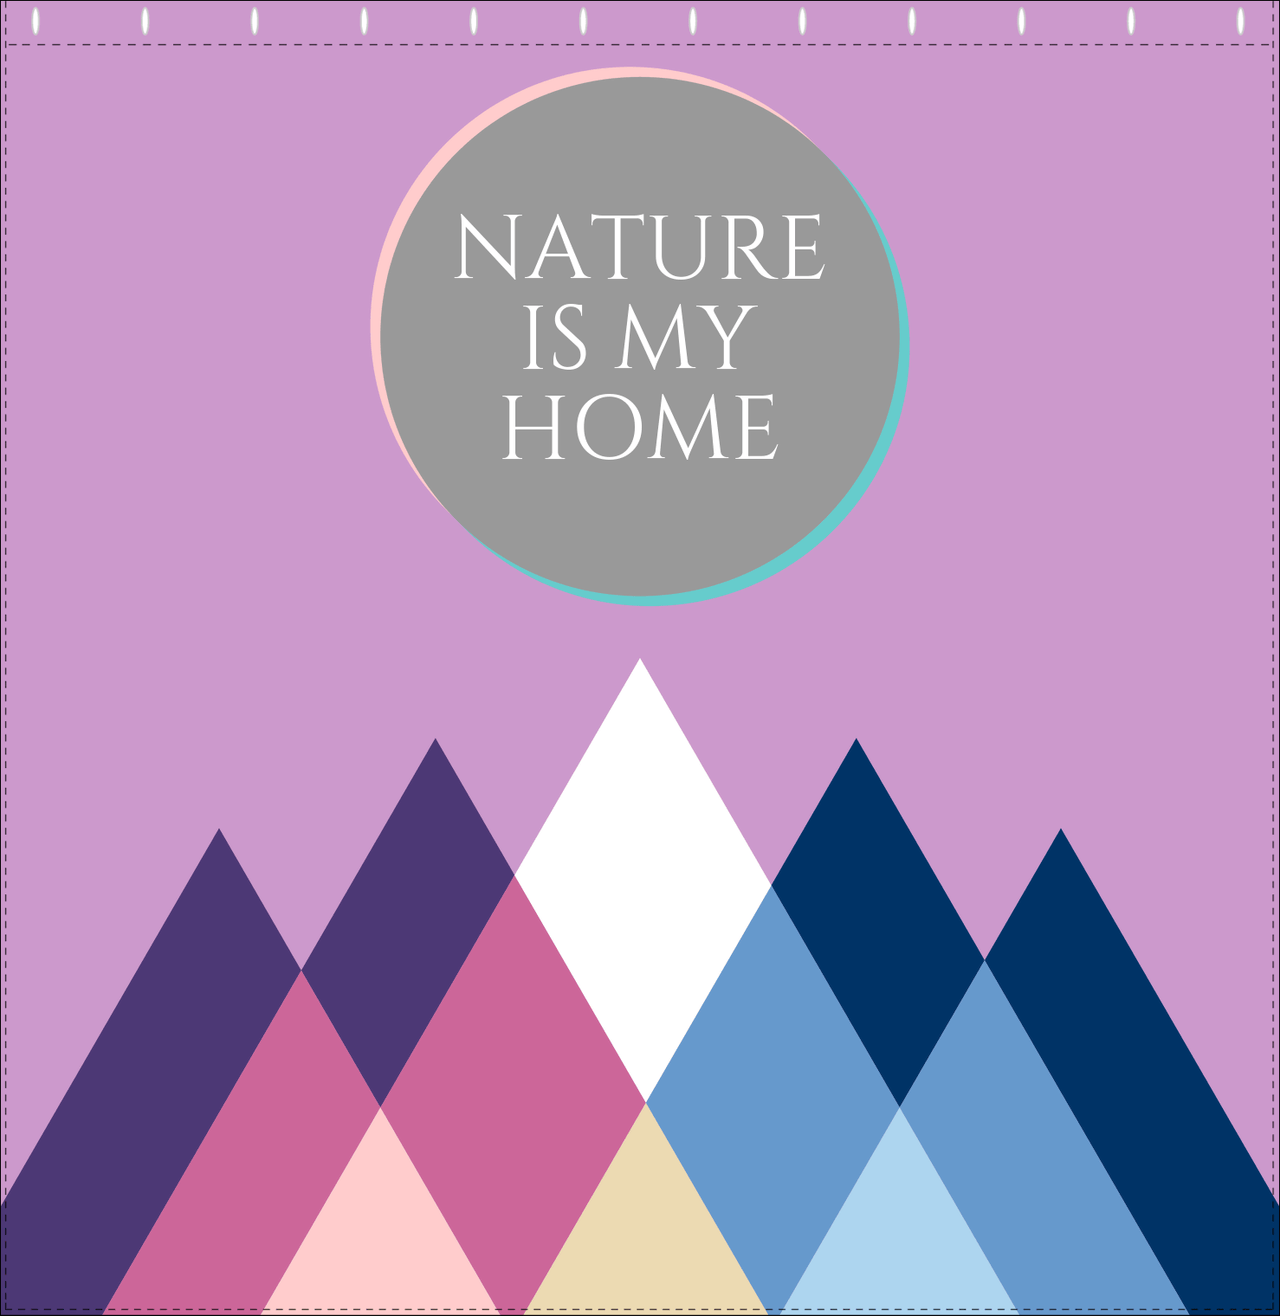 Personalized Mountain Range Shower Curtain - Purple Background - Nature Is My Home - Decorate View